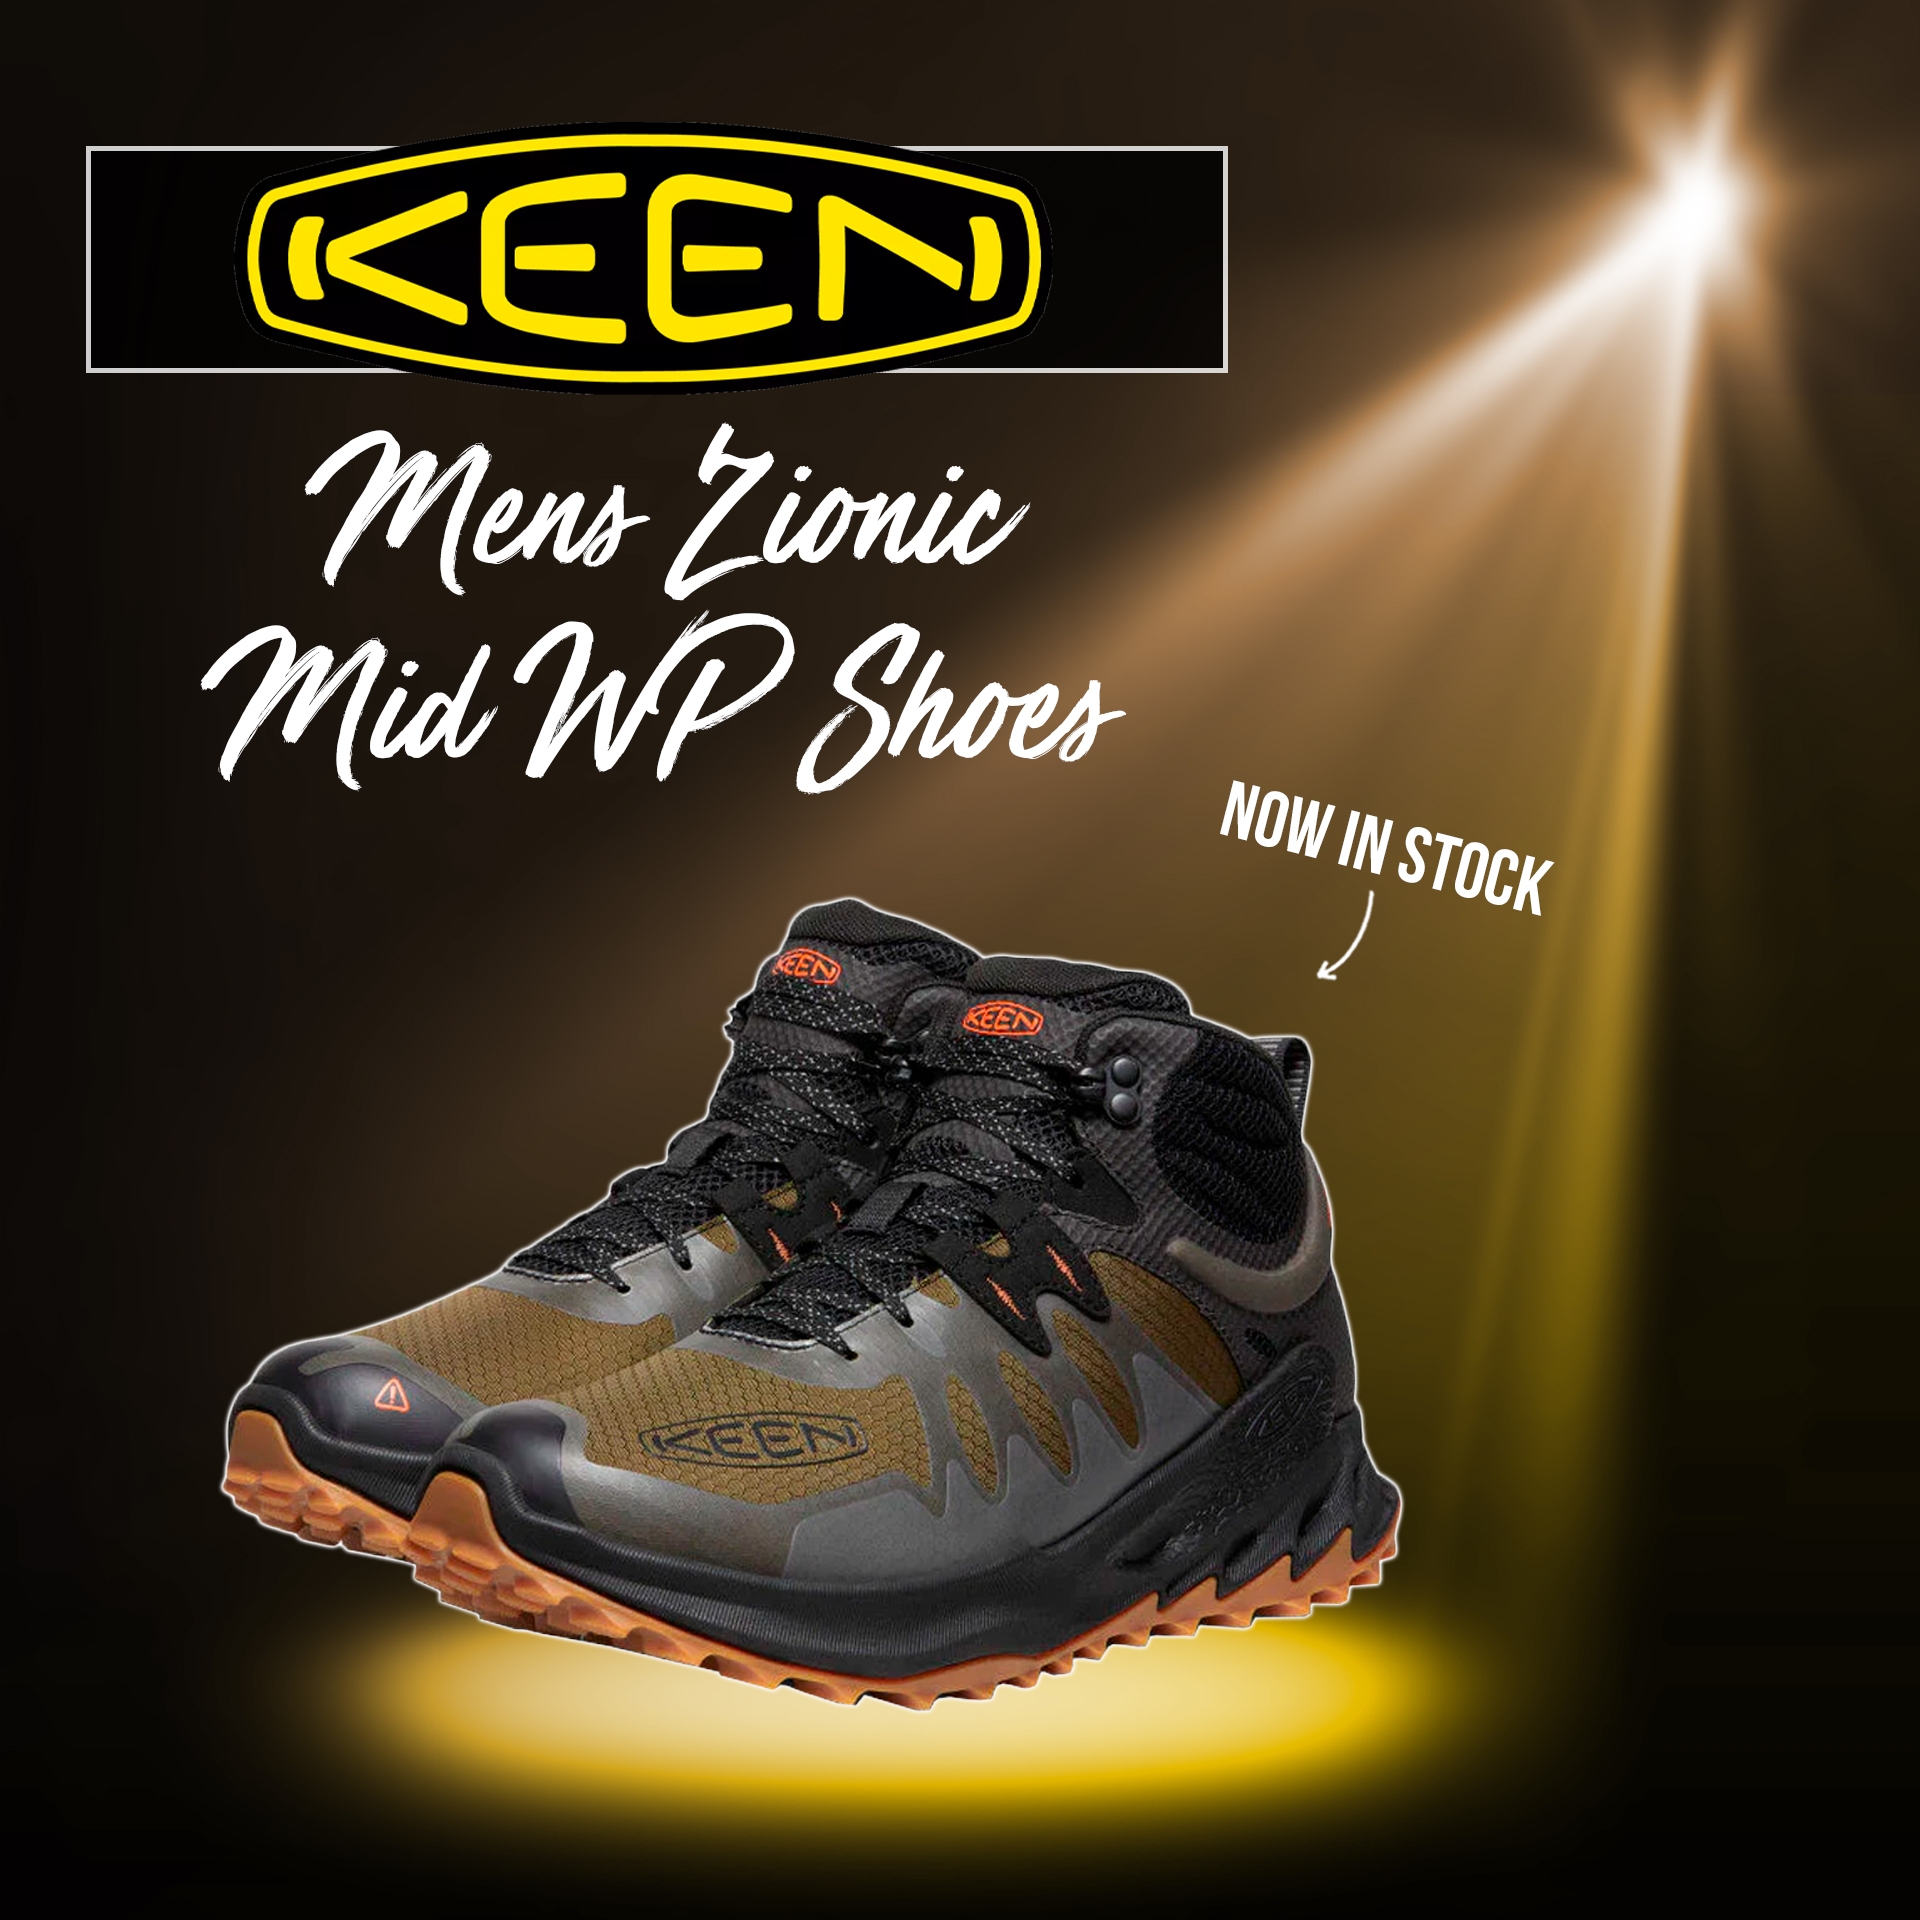 New - Keen Mens Zionic Mid WP Shoes